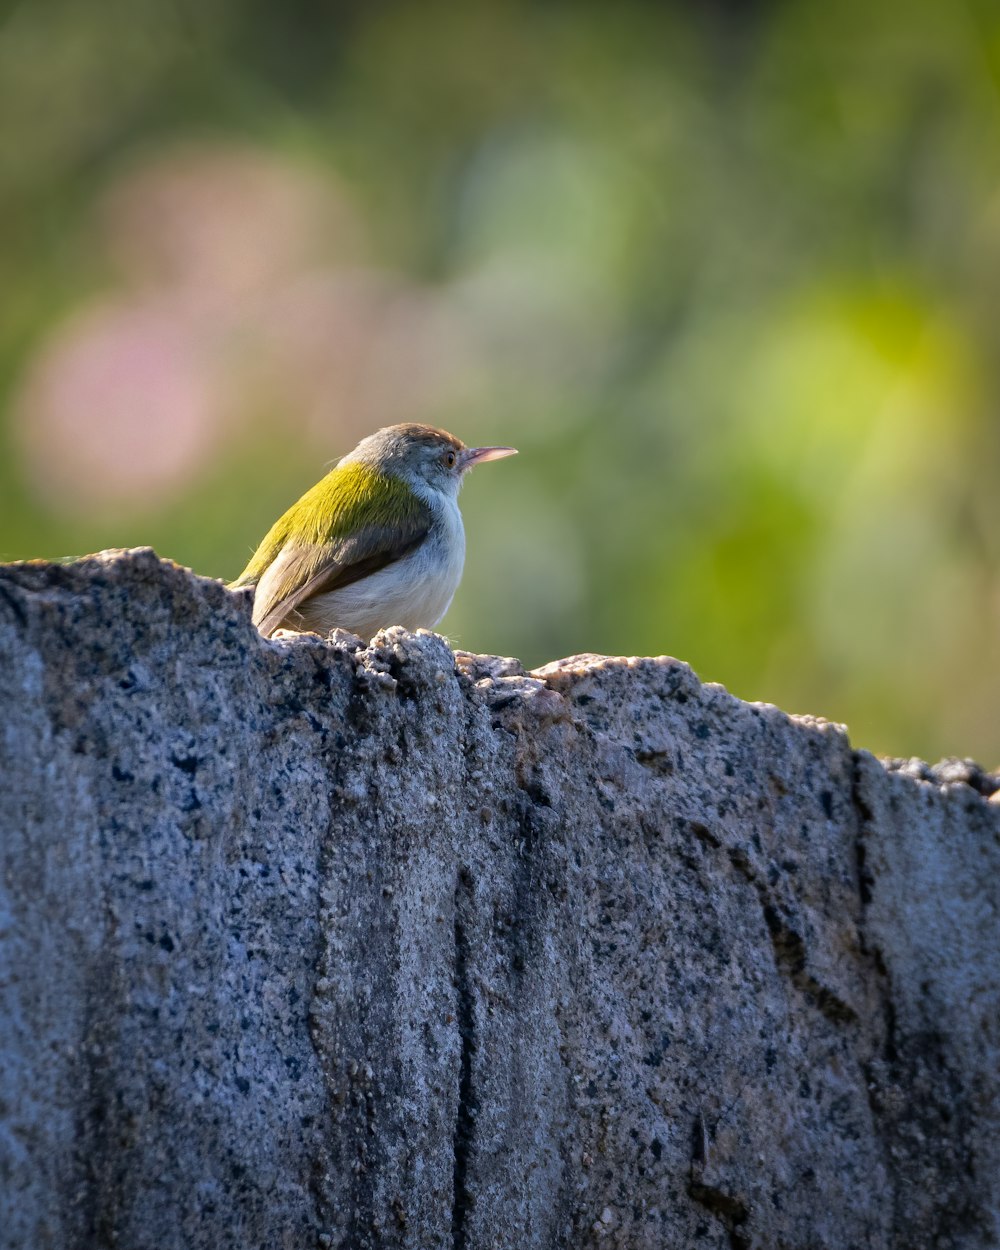 green and white bird on brown tree trunk